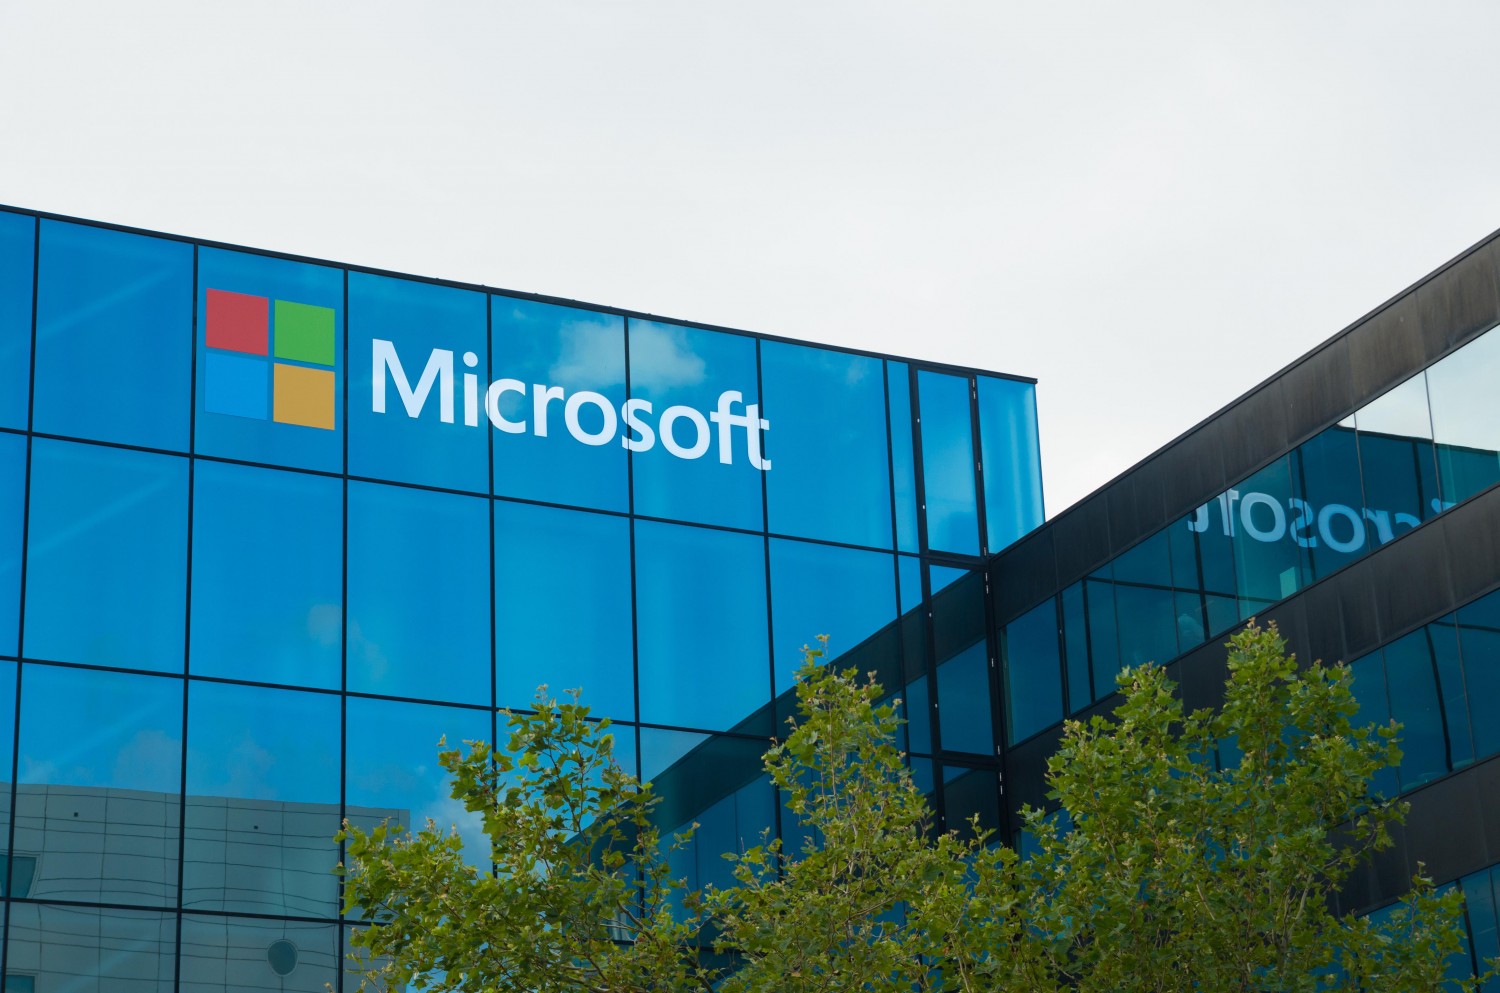 Microsoft's market value tops $500 billion again after 17 years